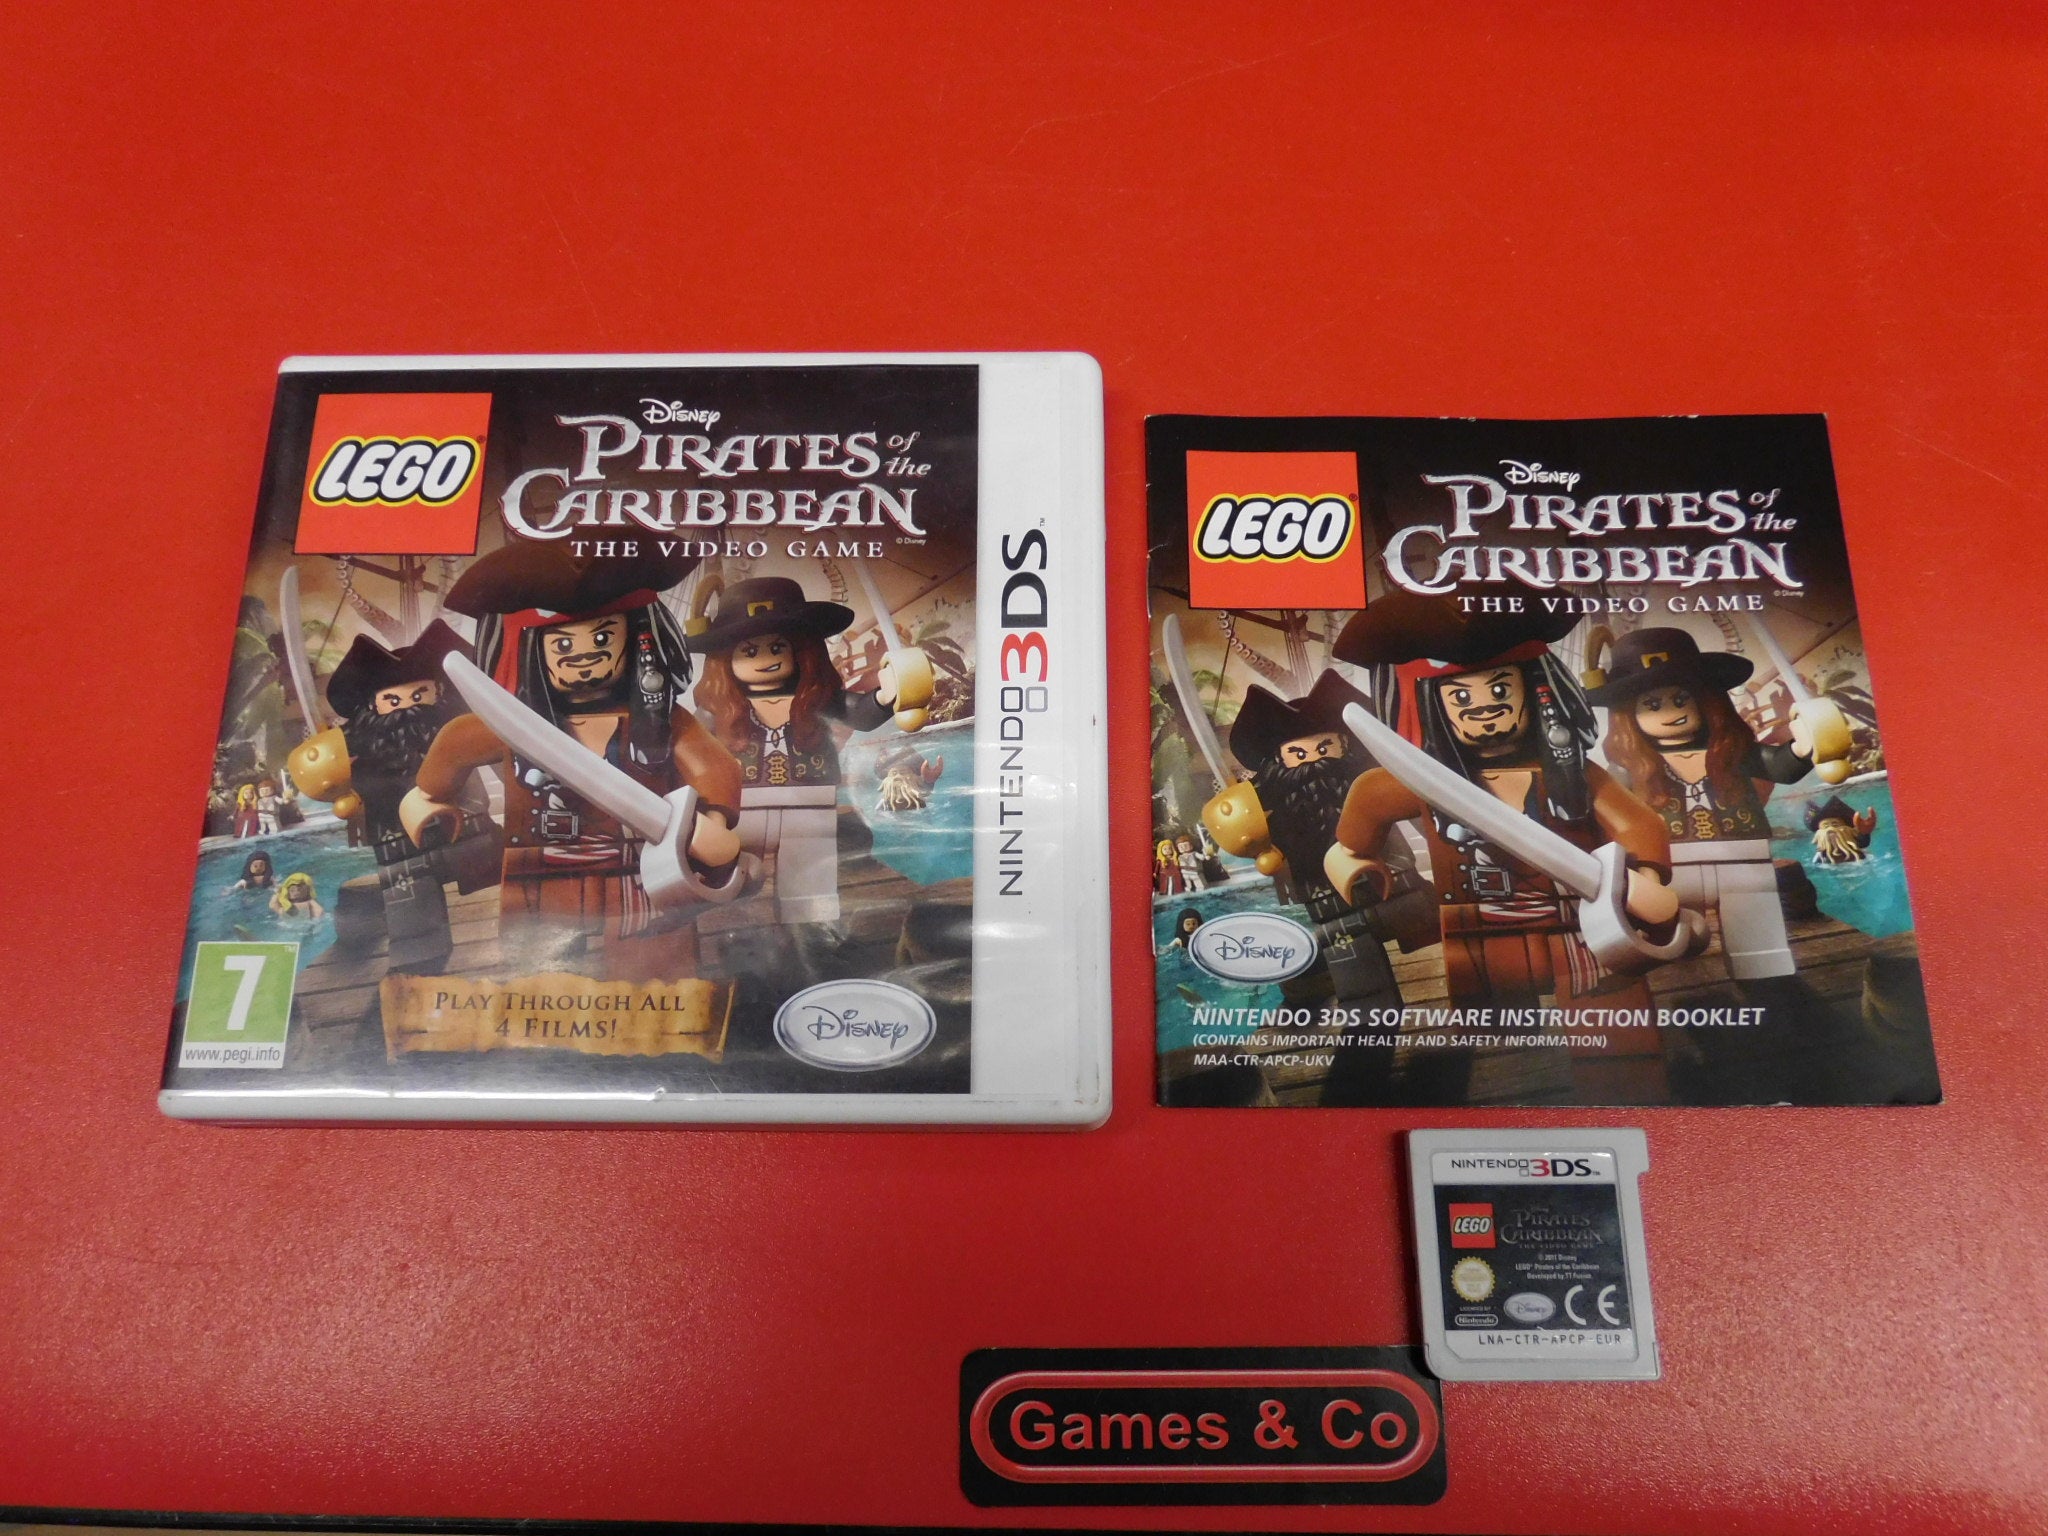 LEGO PIRATES OF THE CARIBBEAN THE VIDEO GAME